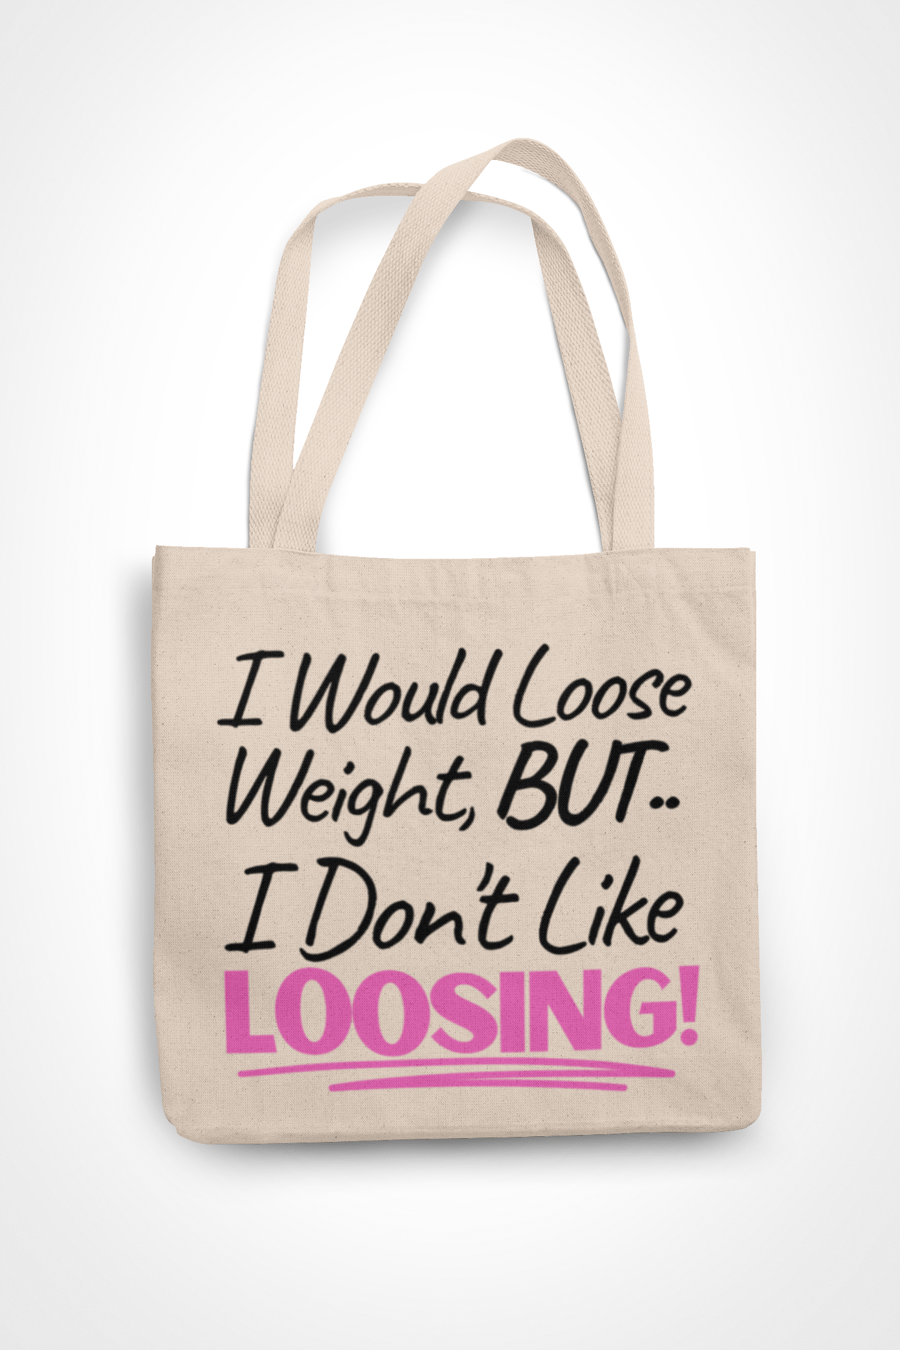 I Would Loose Weight, But I Don't Like loosing -  Funny Novelty Tote Bag